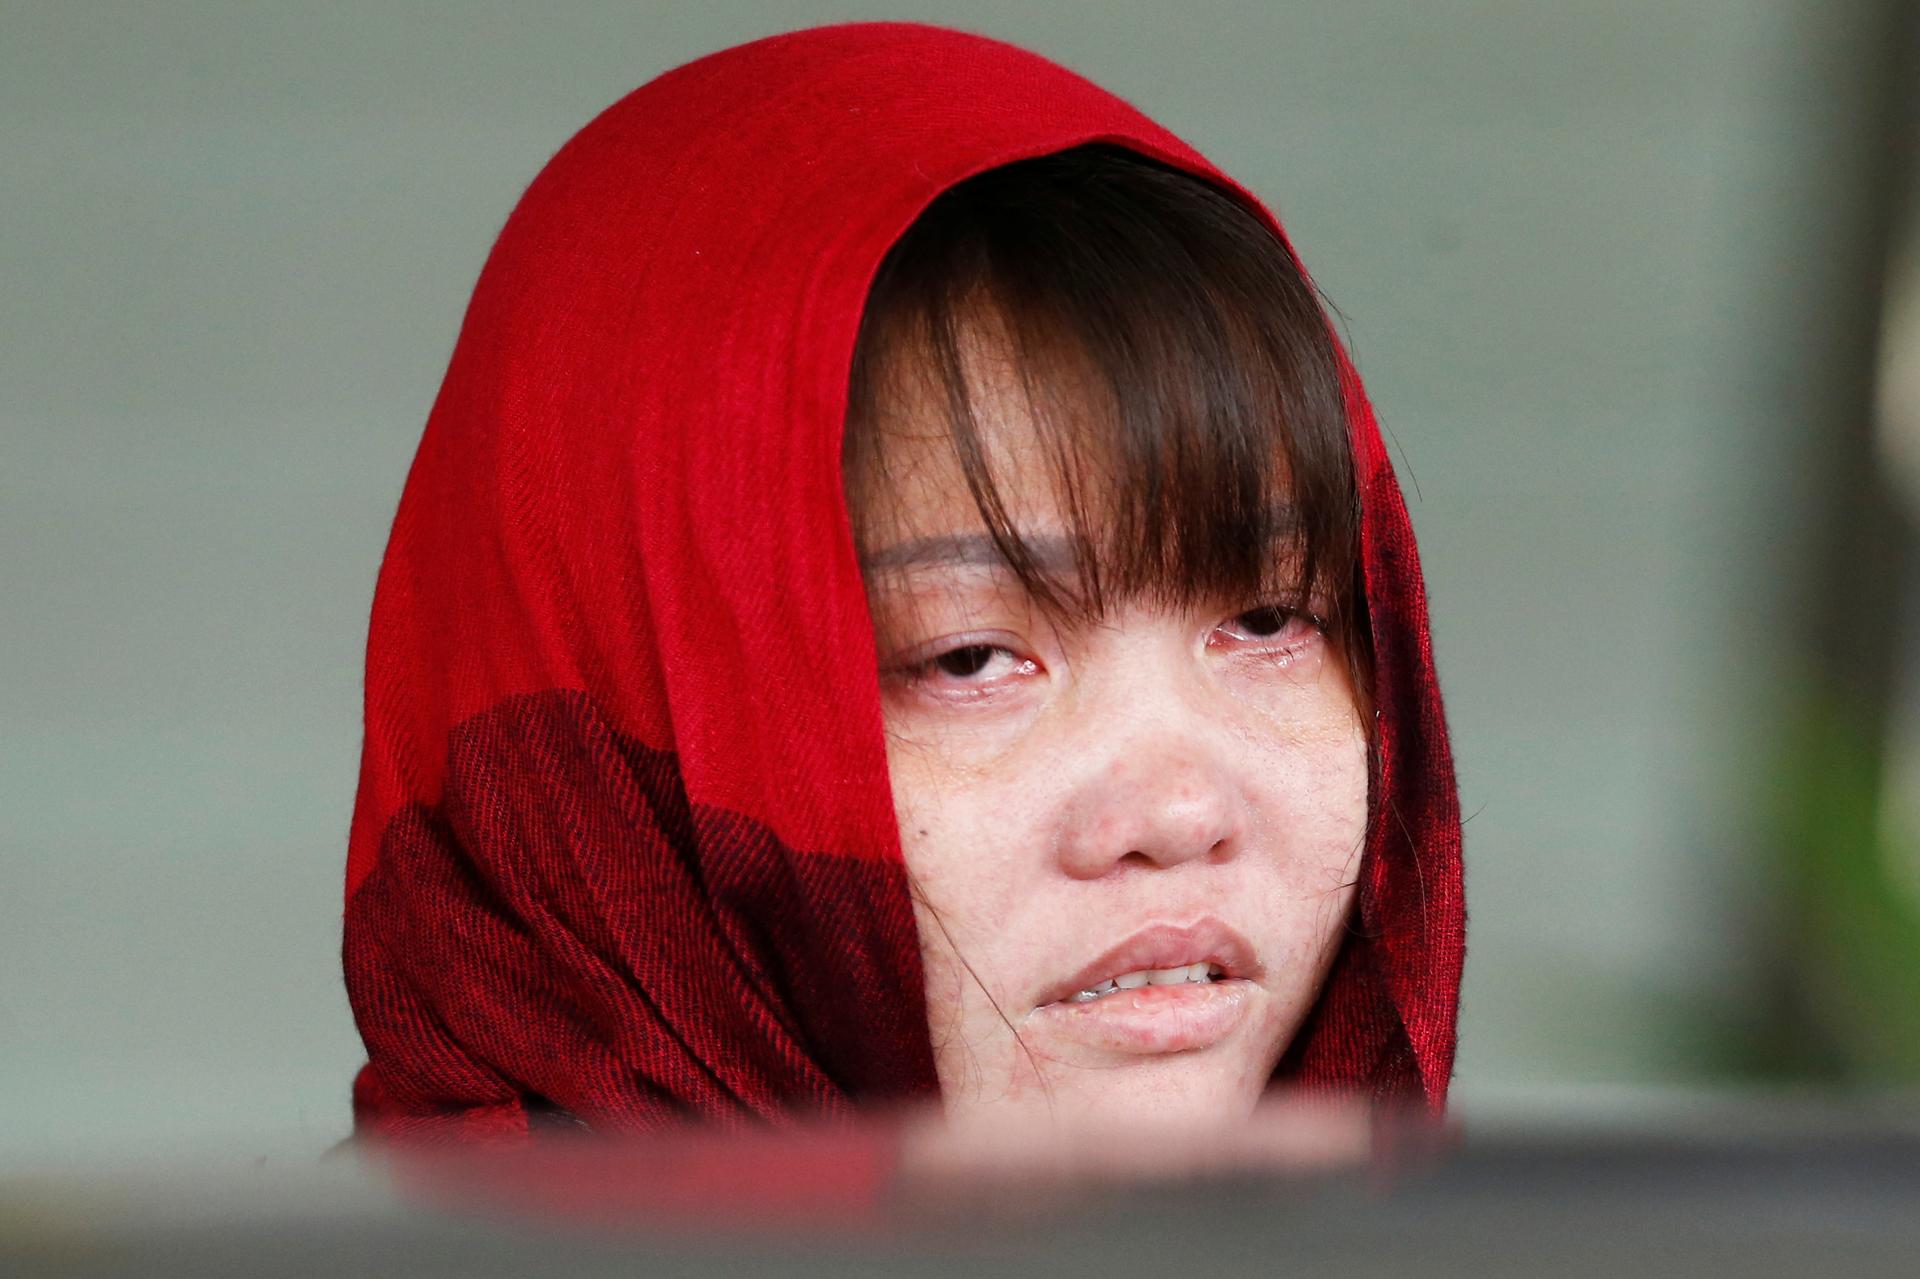 Malaysia to free Vietnamese woman accused of Kim Jong Nam murder on May 3: lawyer